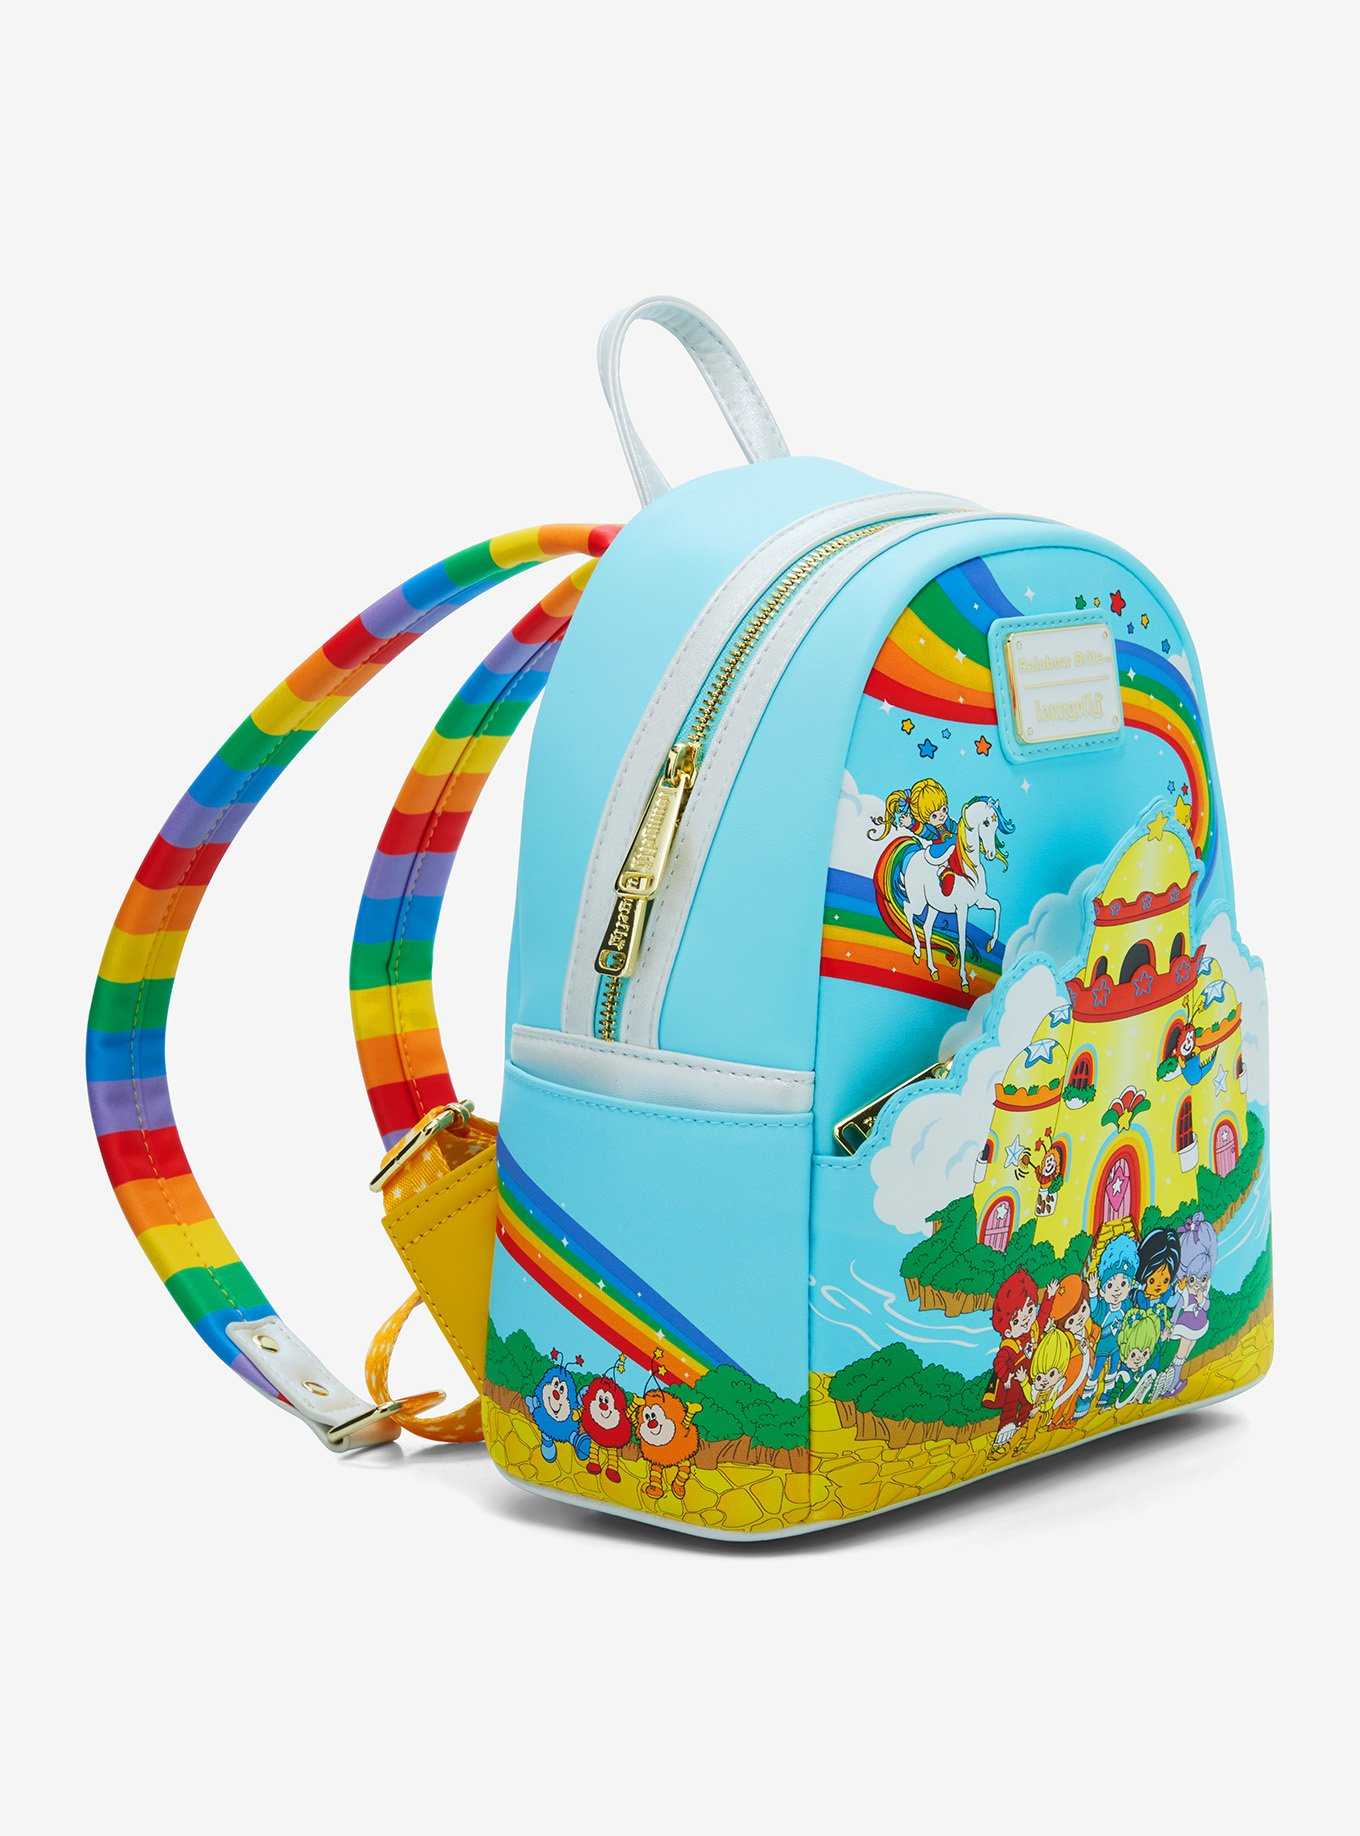 Loungefly Rainbow Brite Castle Mini Backpack, , hi-res